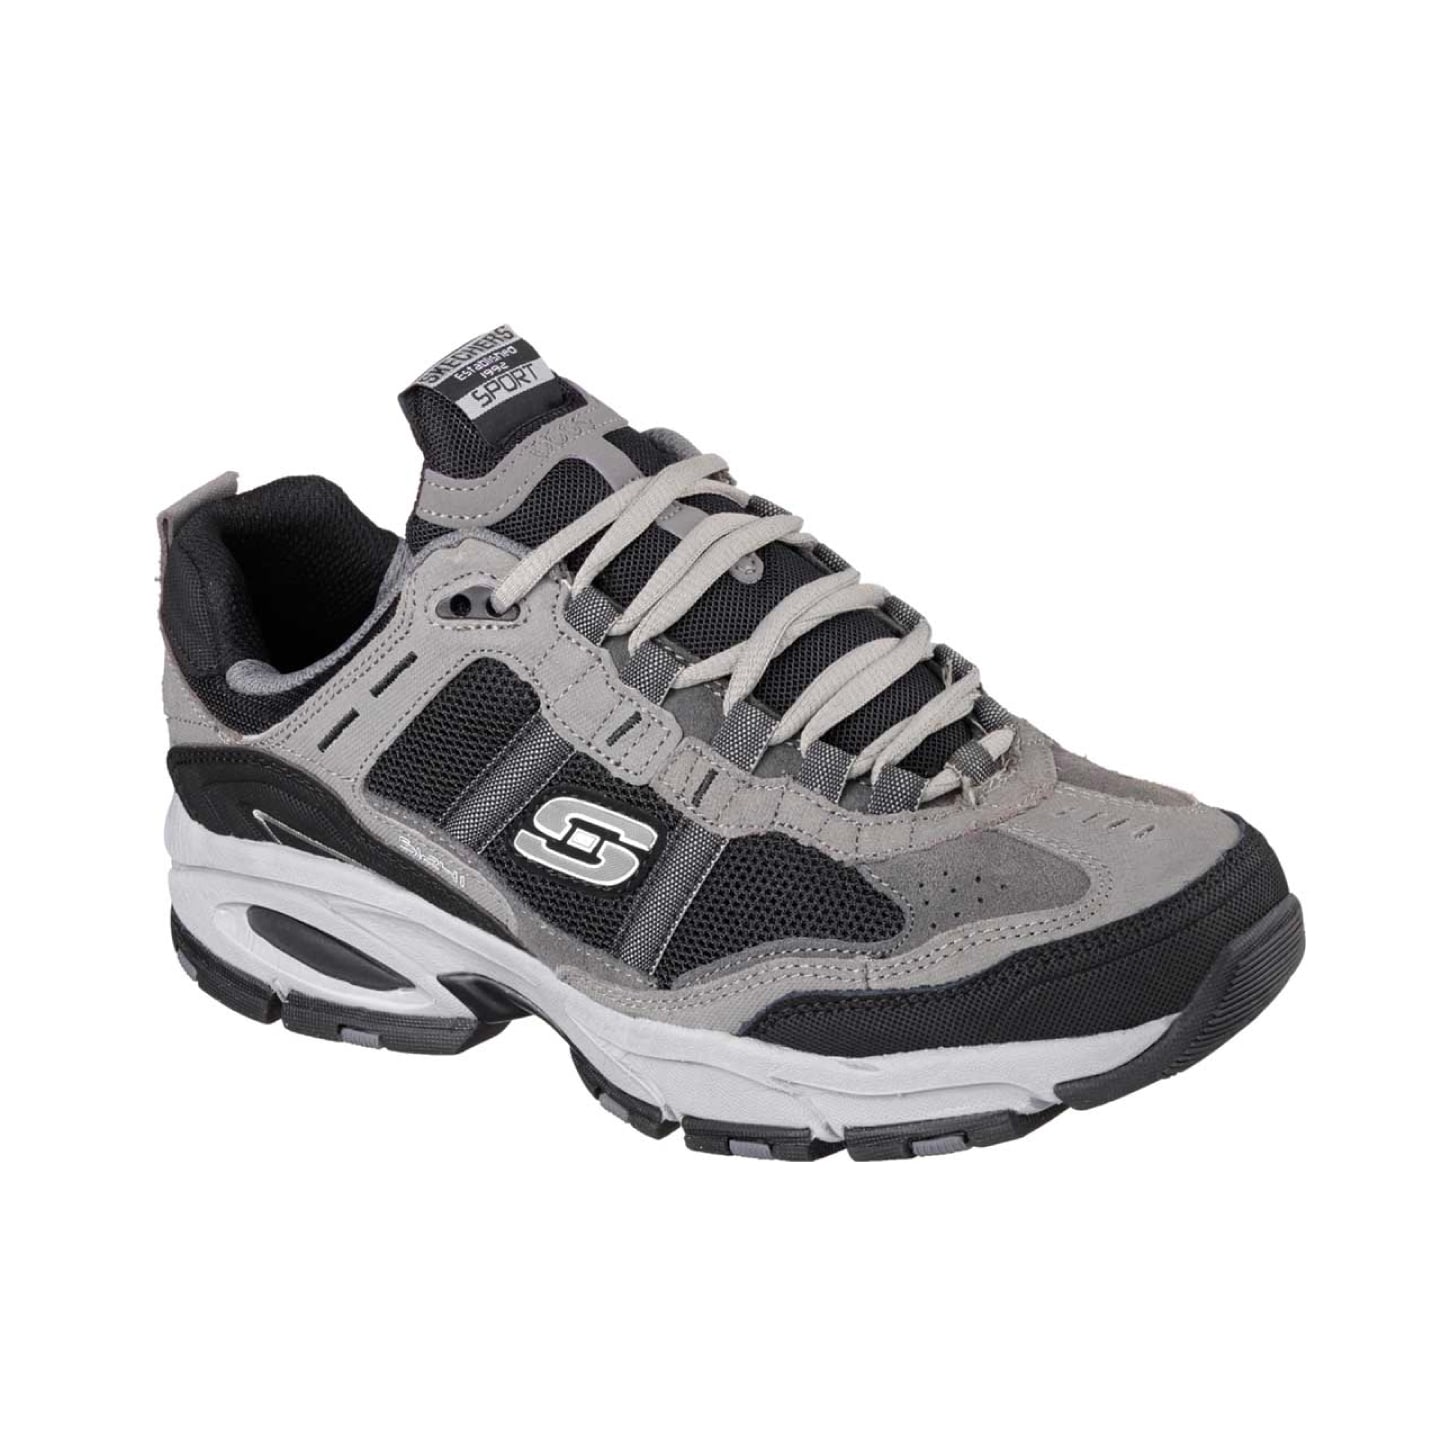 backup pubertet sikkert Skechers Shoes, Boots, Sandals, Handbags and More | The Shoe Company